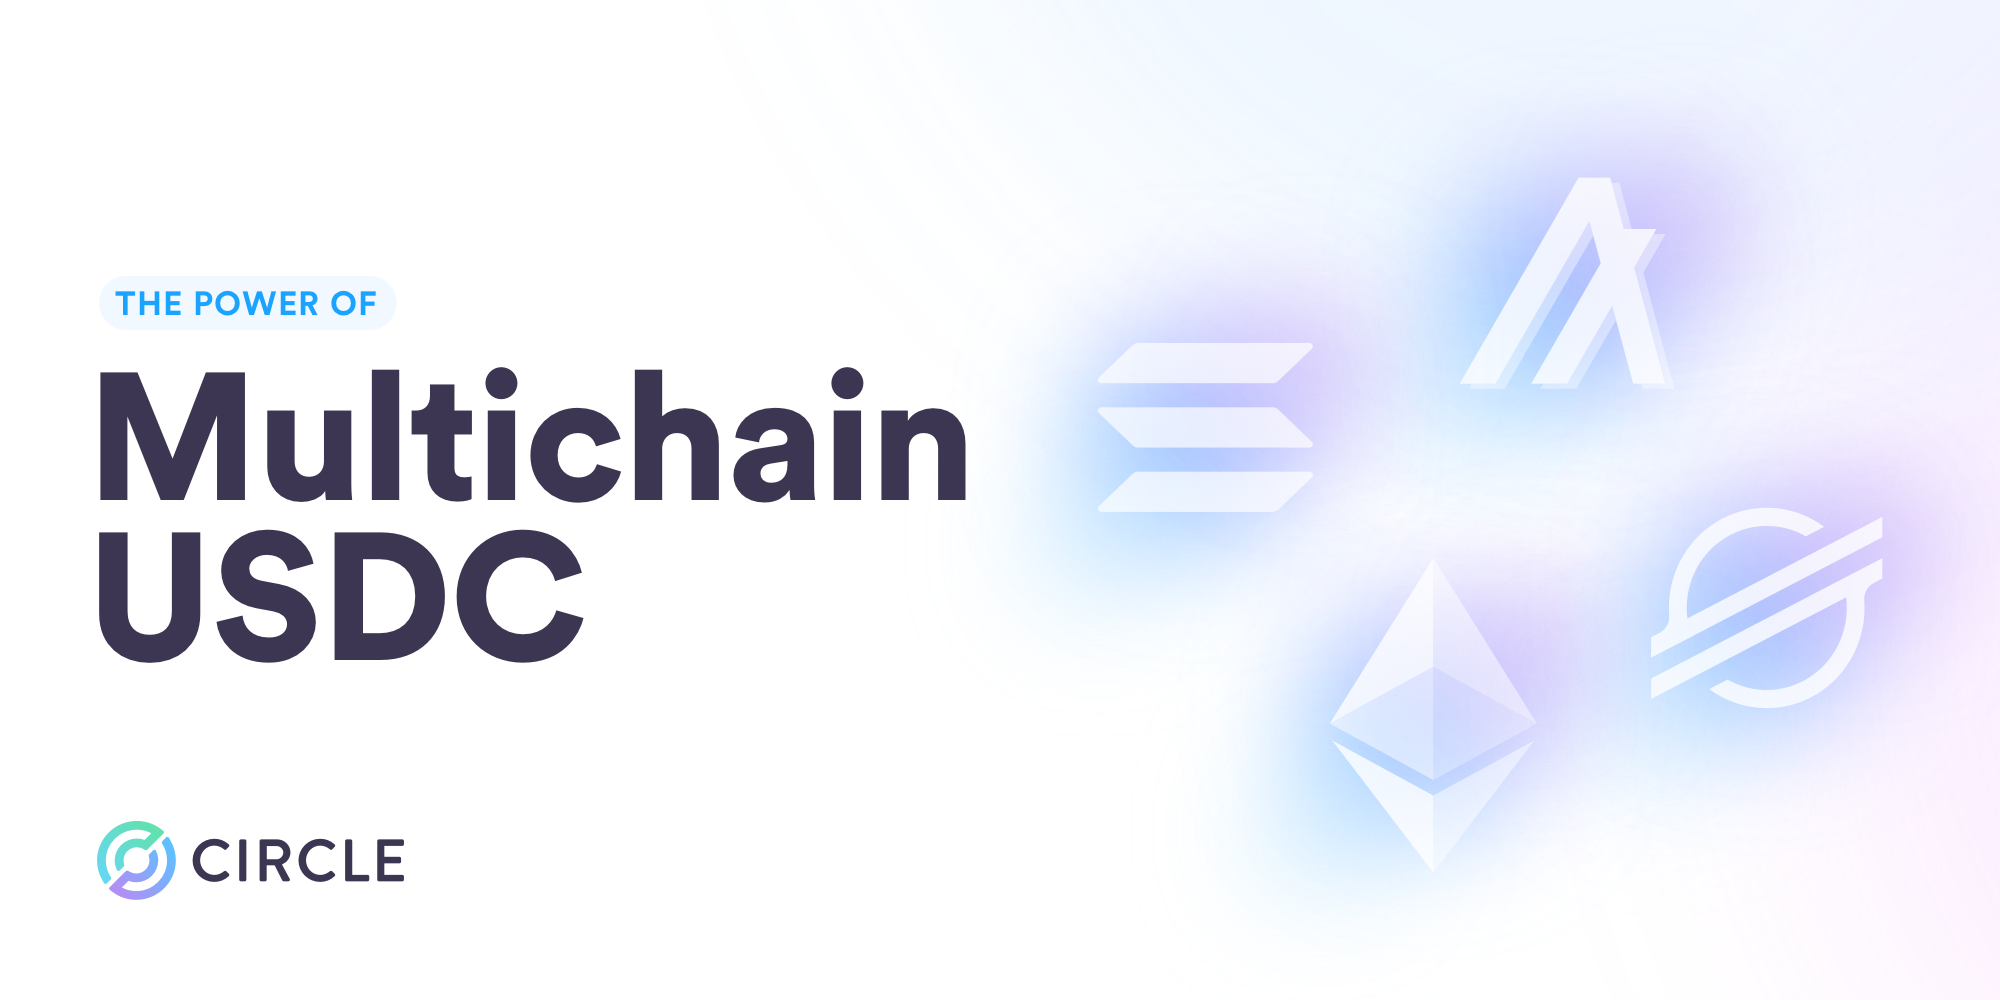 Discover the blockchains powering the USDC stablecoin ecosystem including Ethereum, Solana, Algorand, and Stellar.